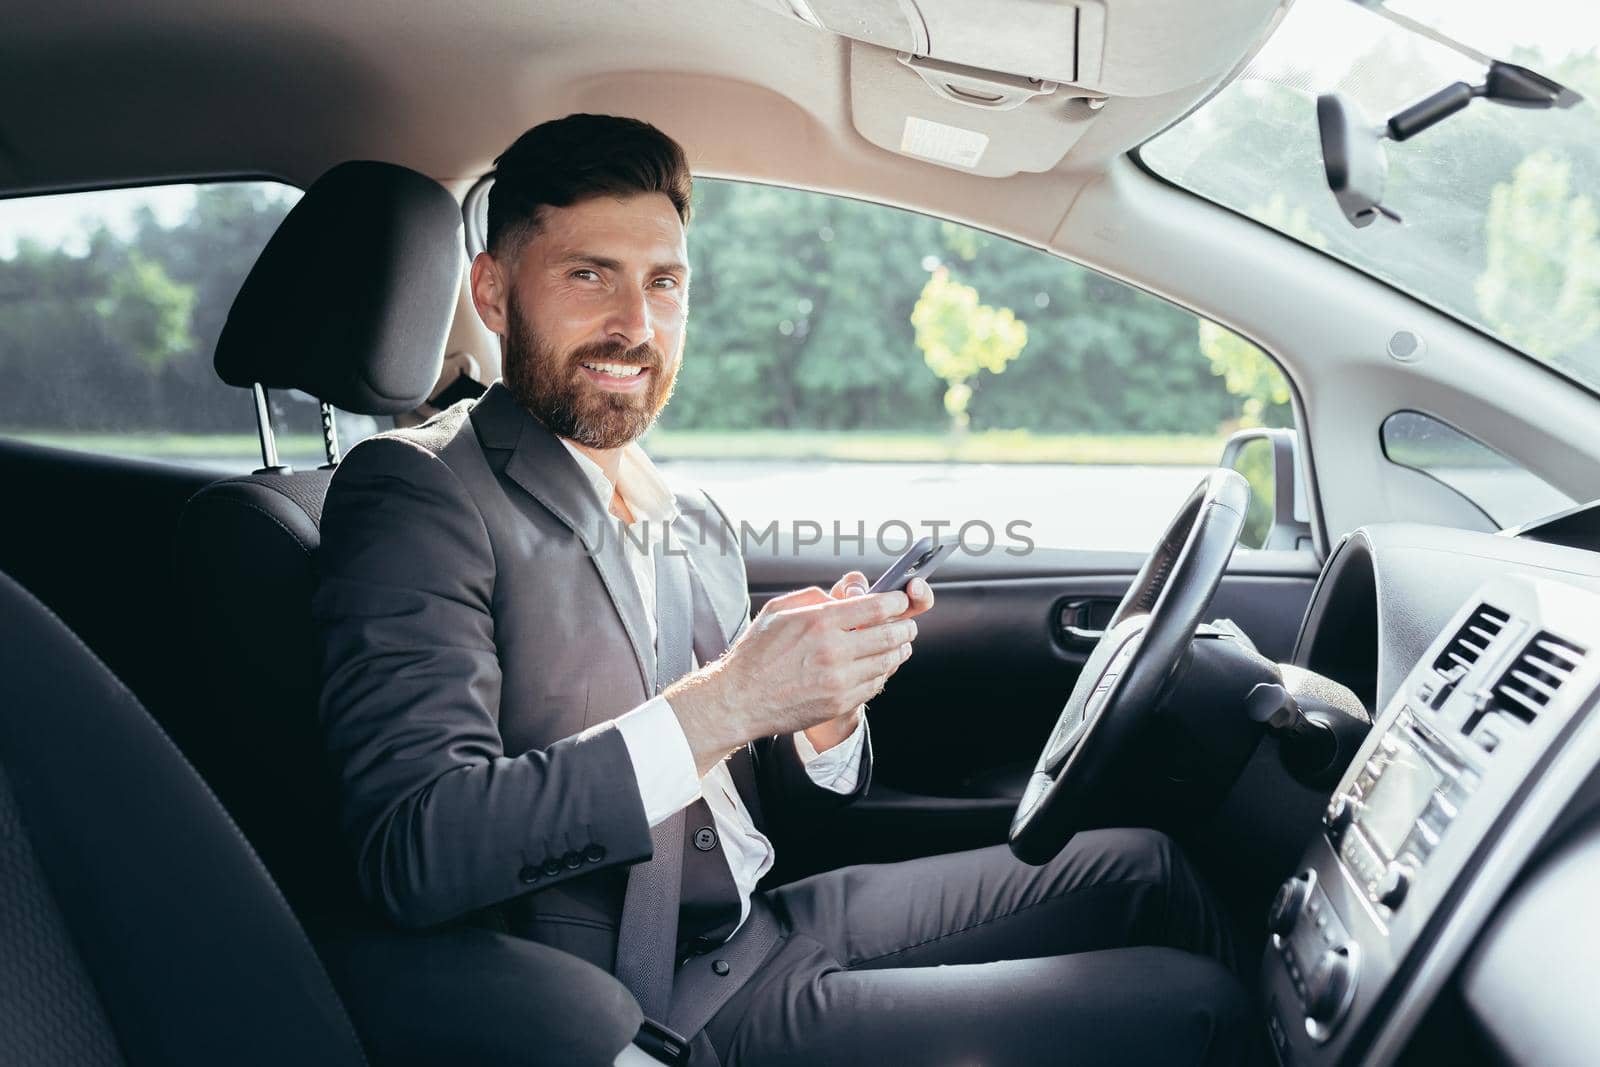 Young man with a beard businessman driving a car in the parking lot smiles and writes on the phone reads the news successful man by voronaman